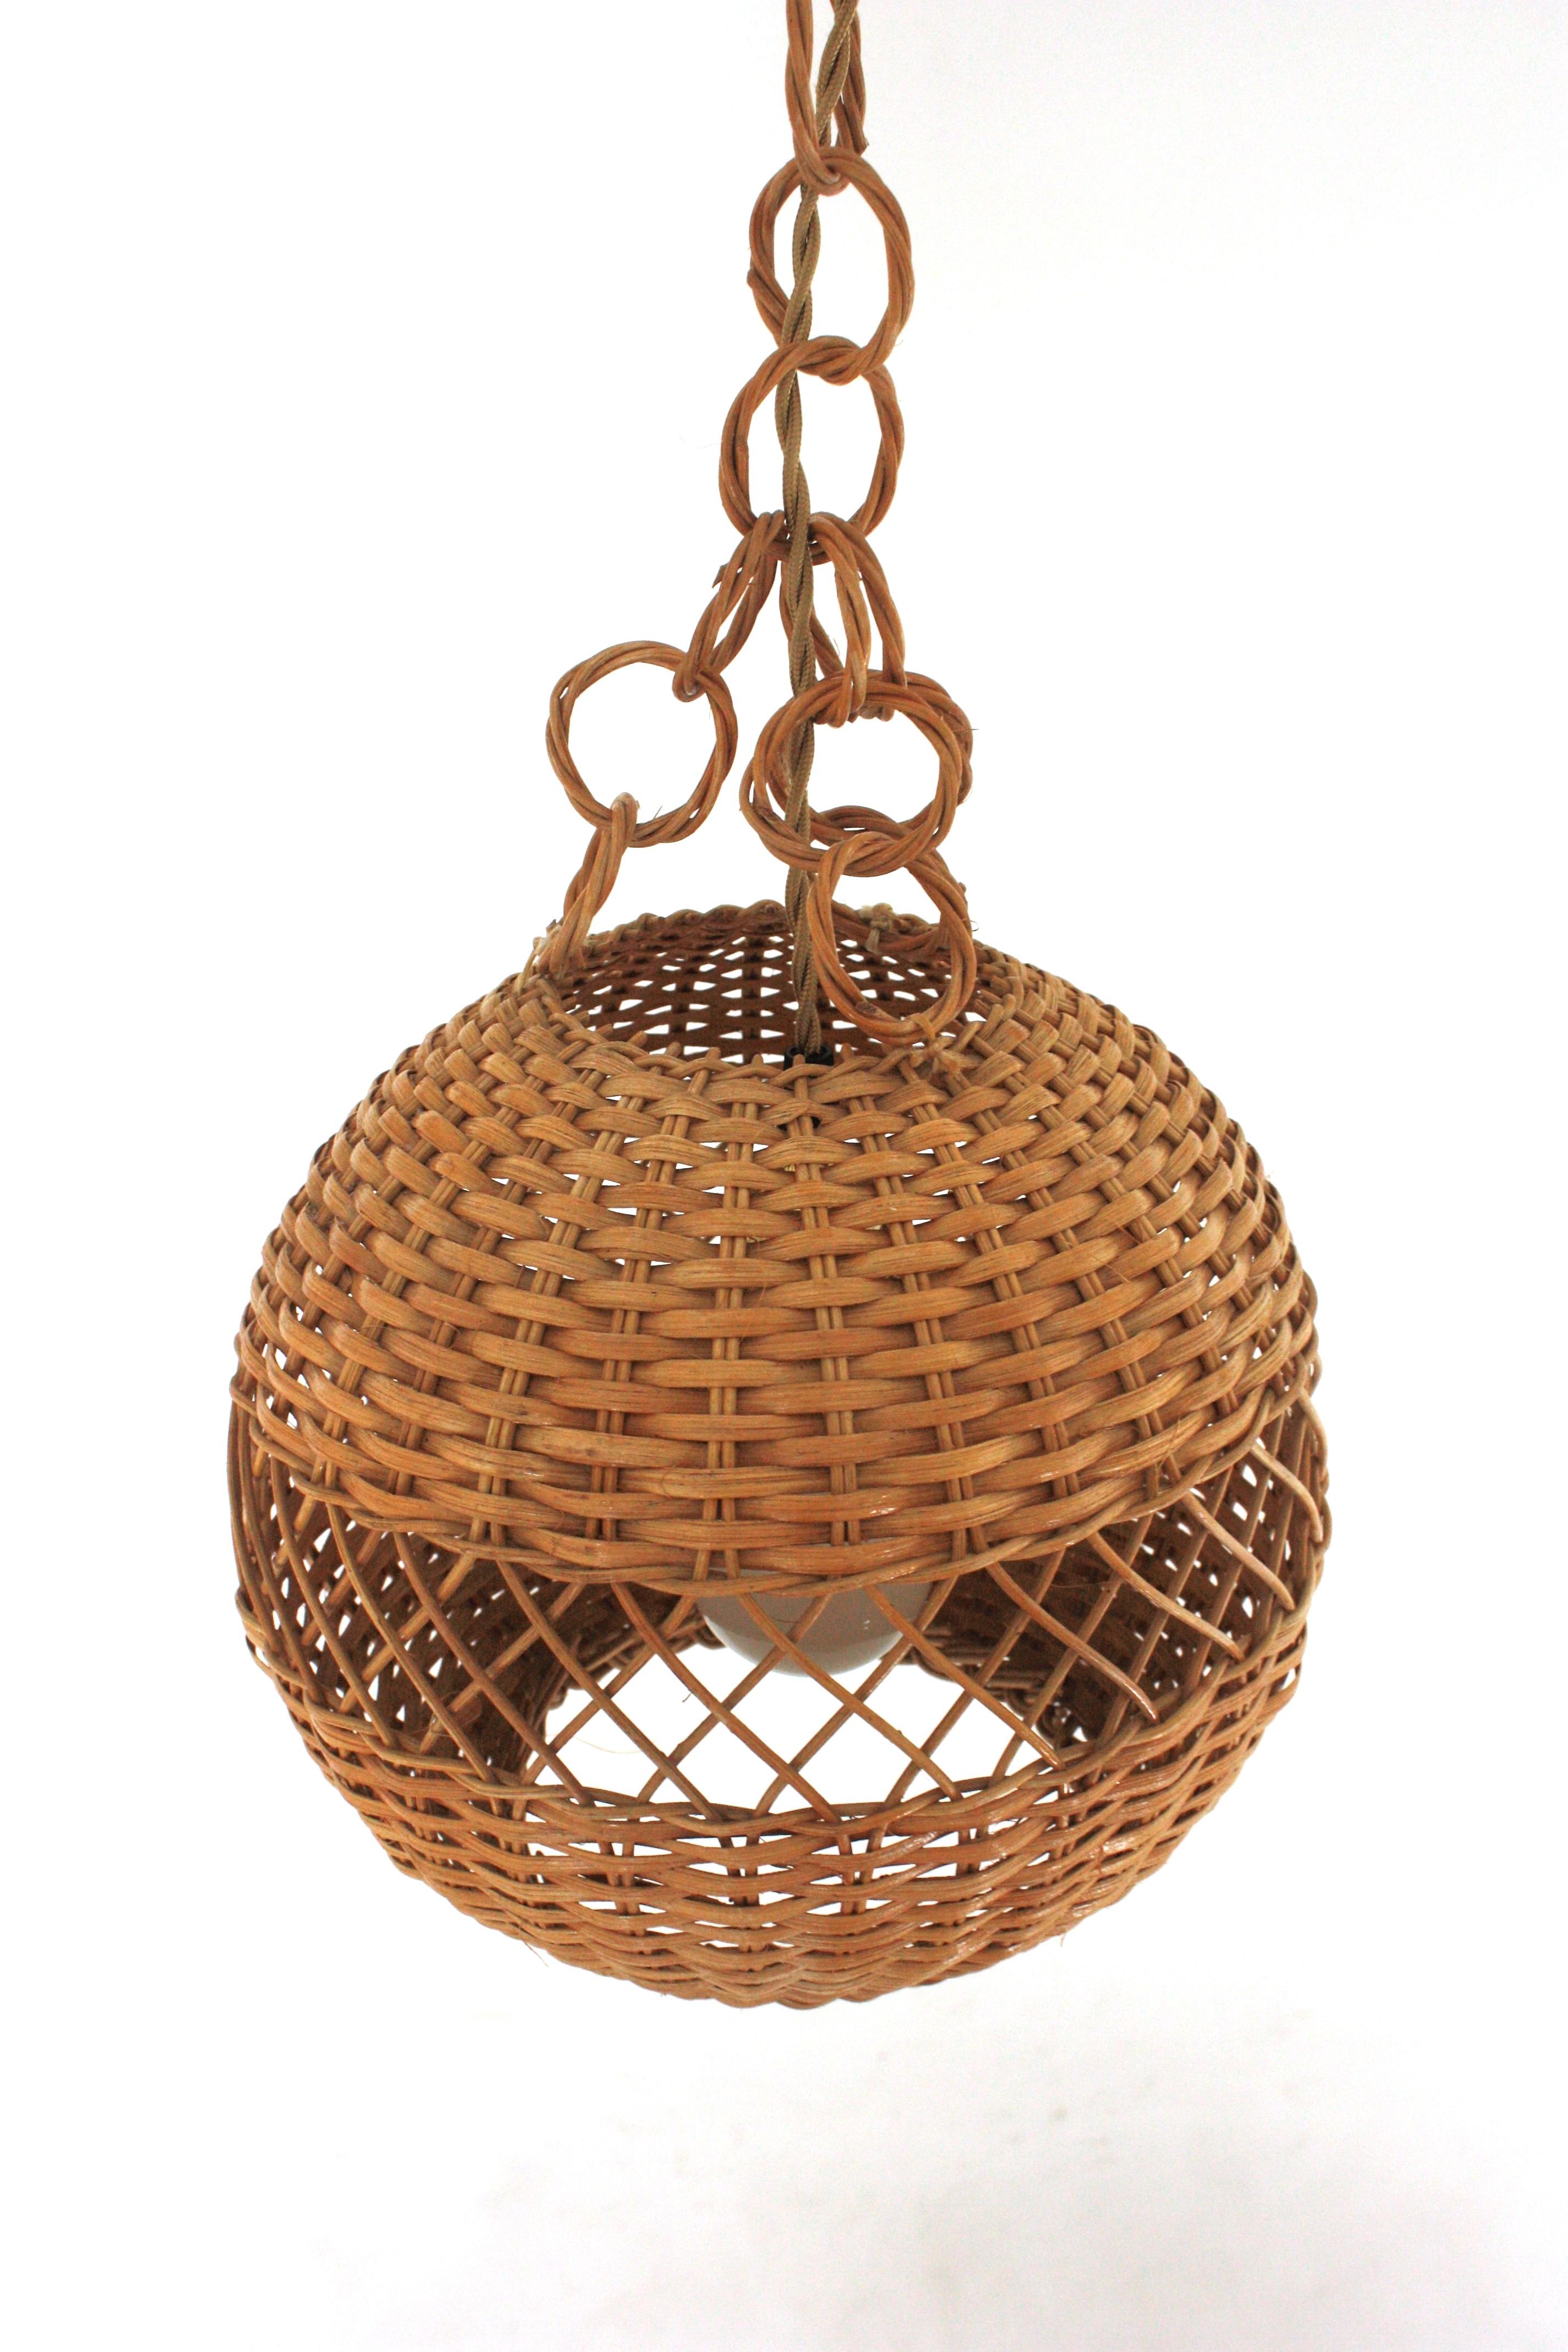 Pair of Handwoven Wicker Globe Pendant Lights or Lanterns For Sale 10